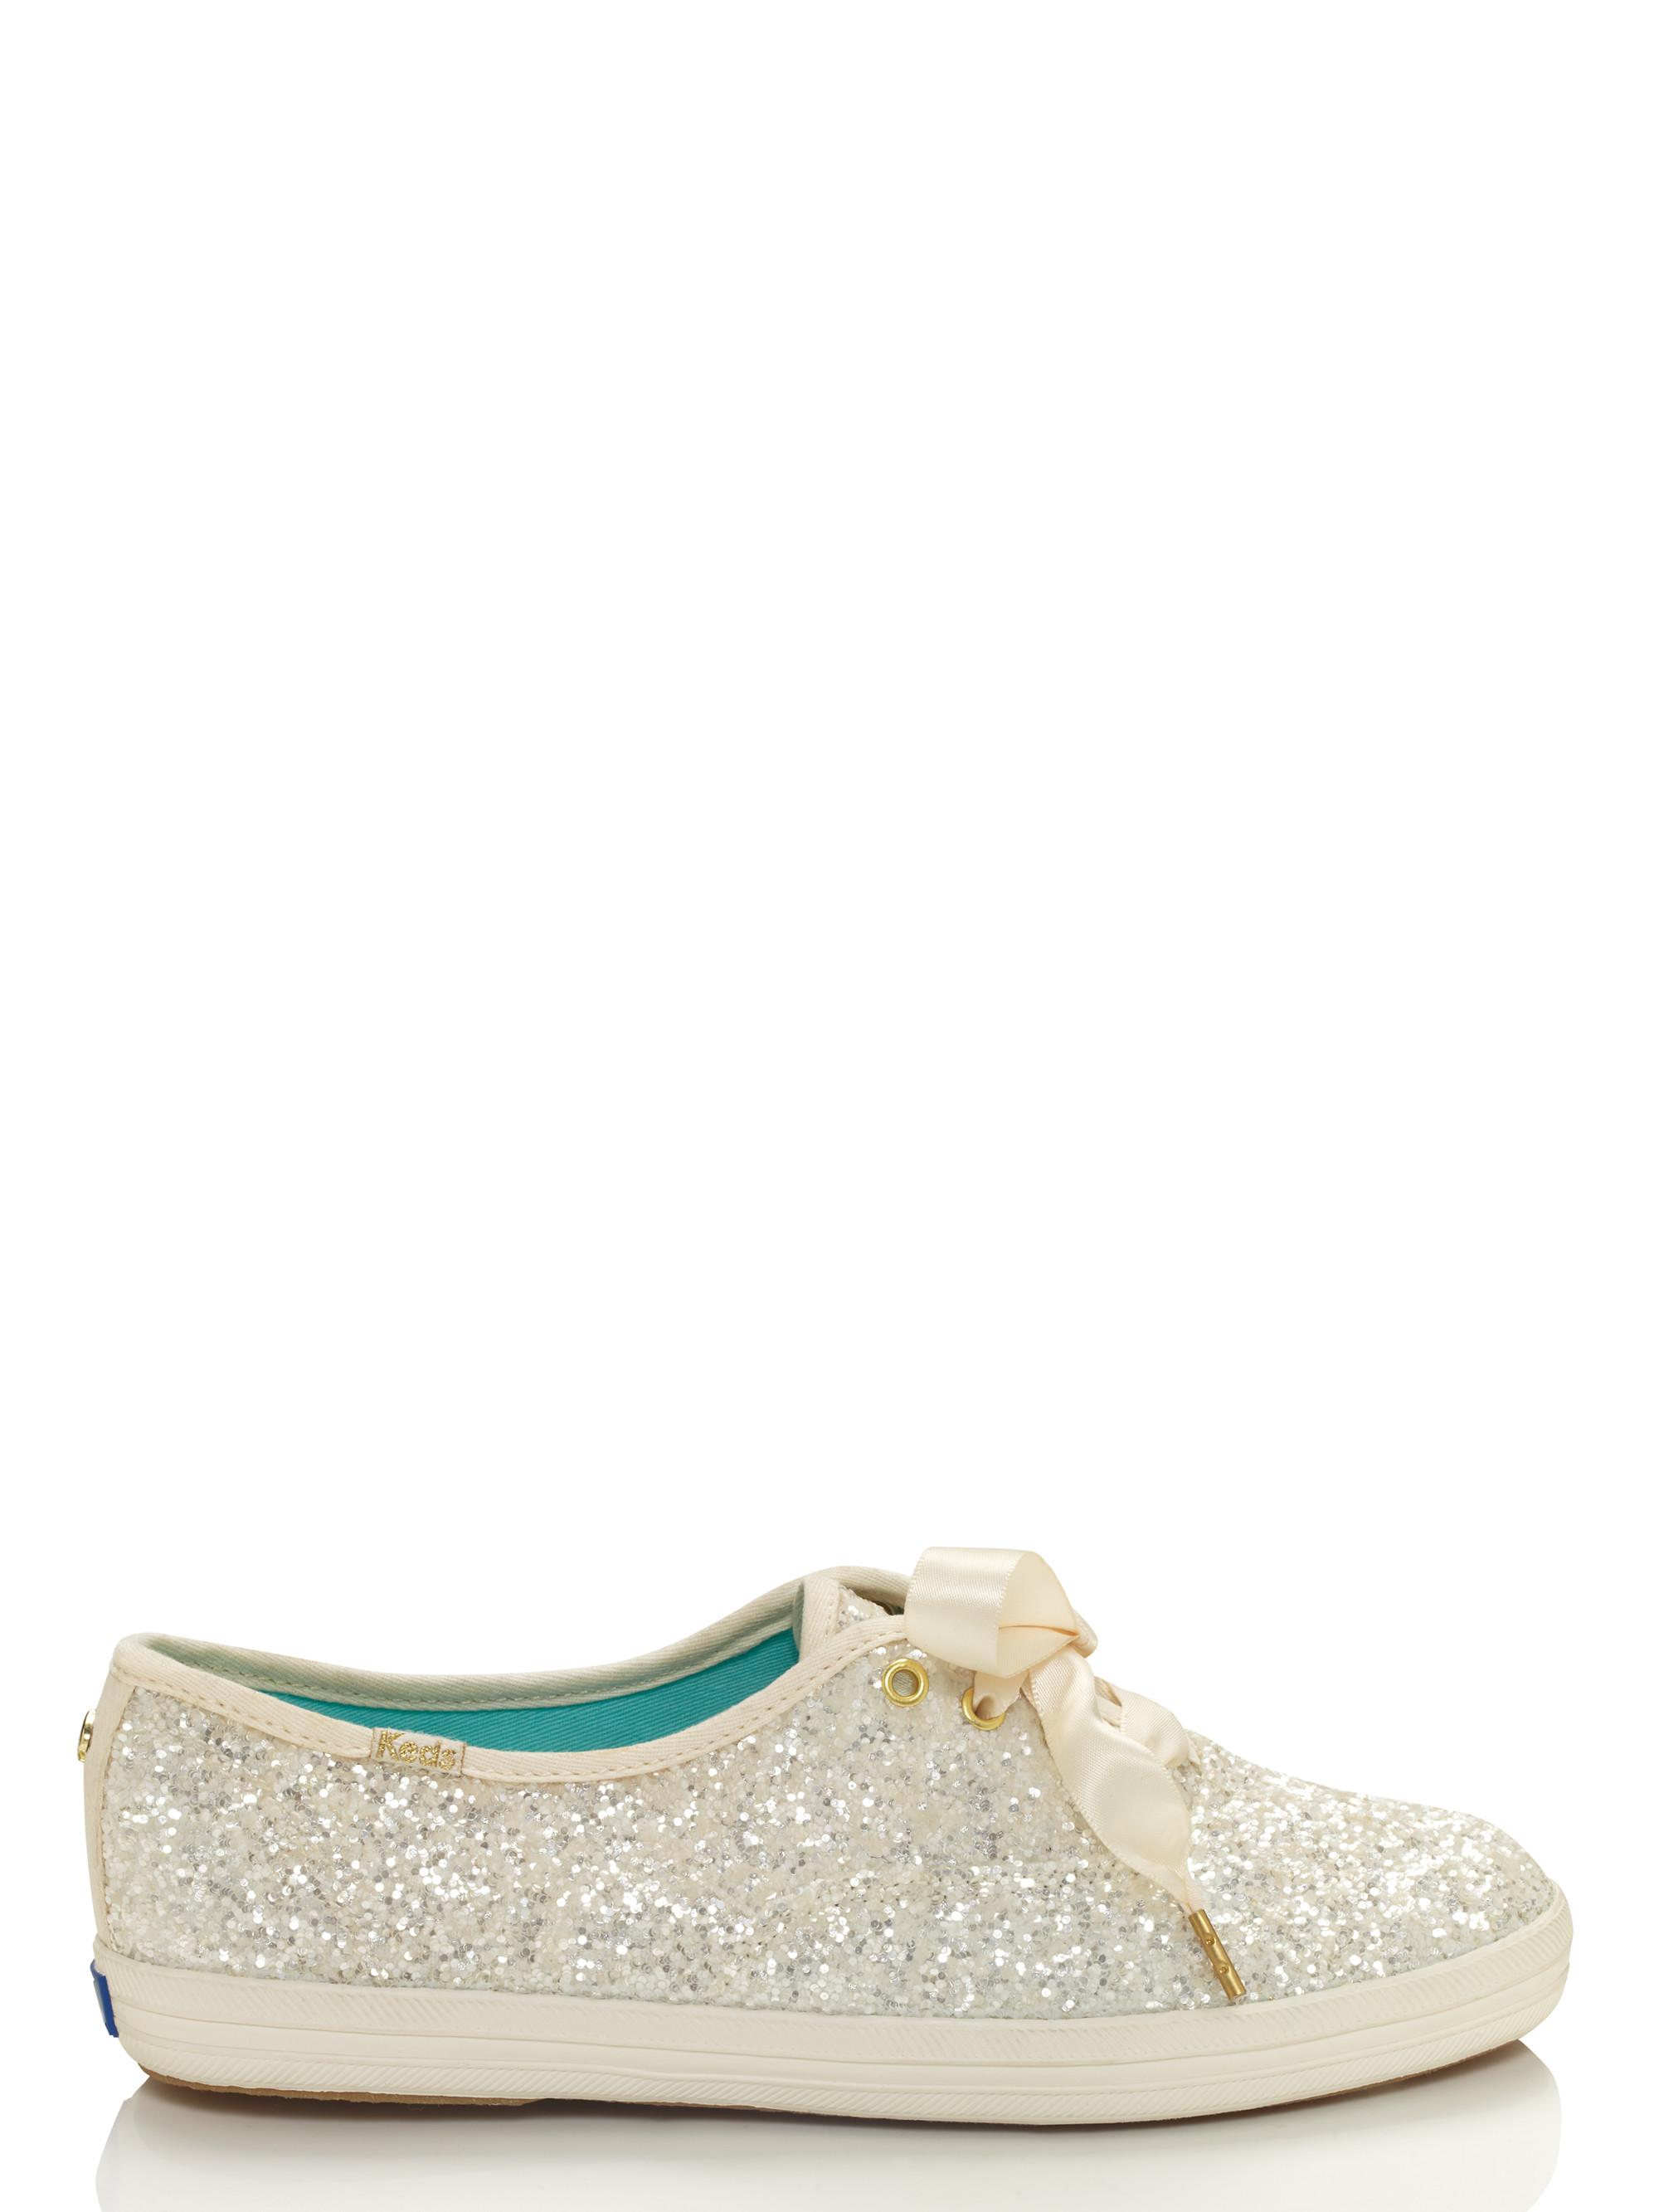 Kate Spade Canvas Keds For Glitter Sneakers in White - Lyst